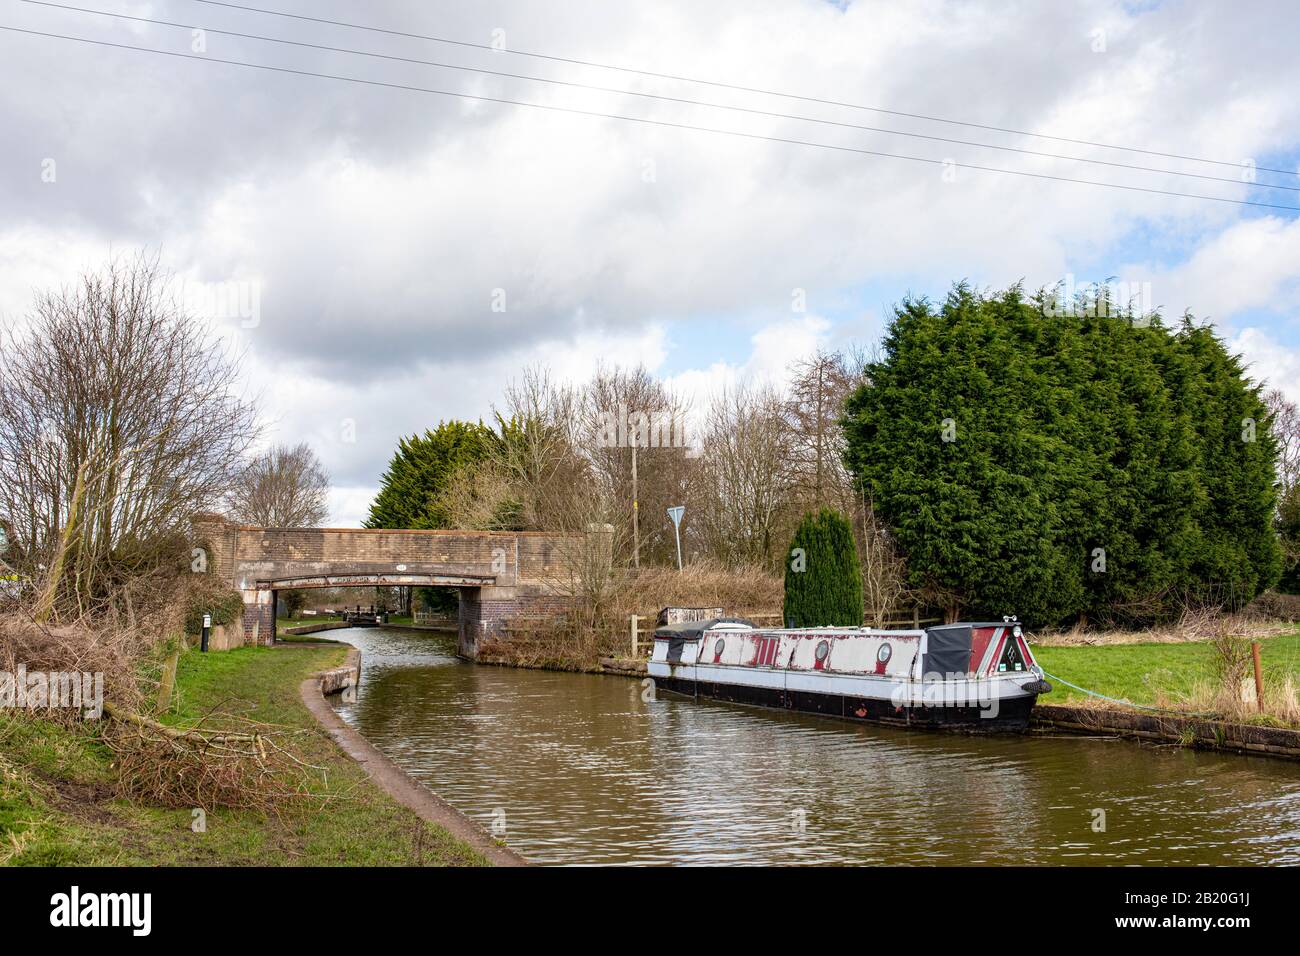 Narrow boat moored on the Trent and Mersey Canal with bridge 161 in distance, Cheshire UK Stock Photo